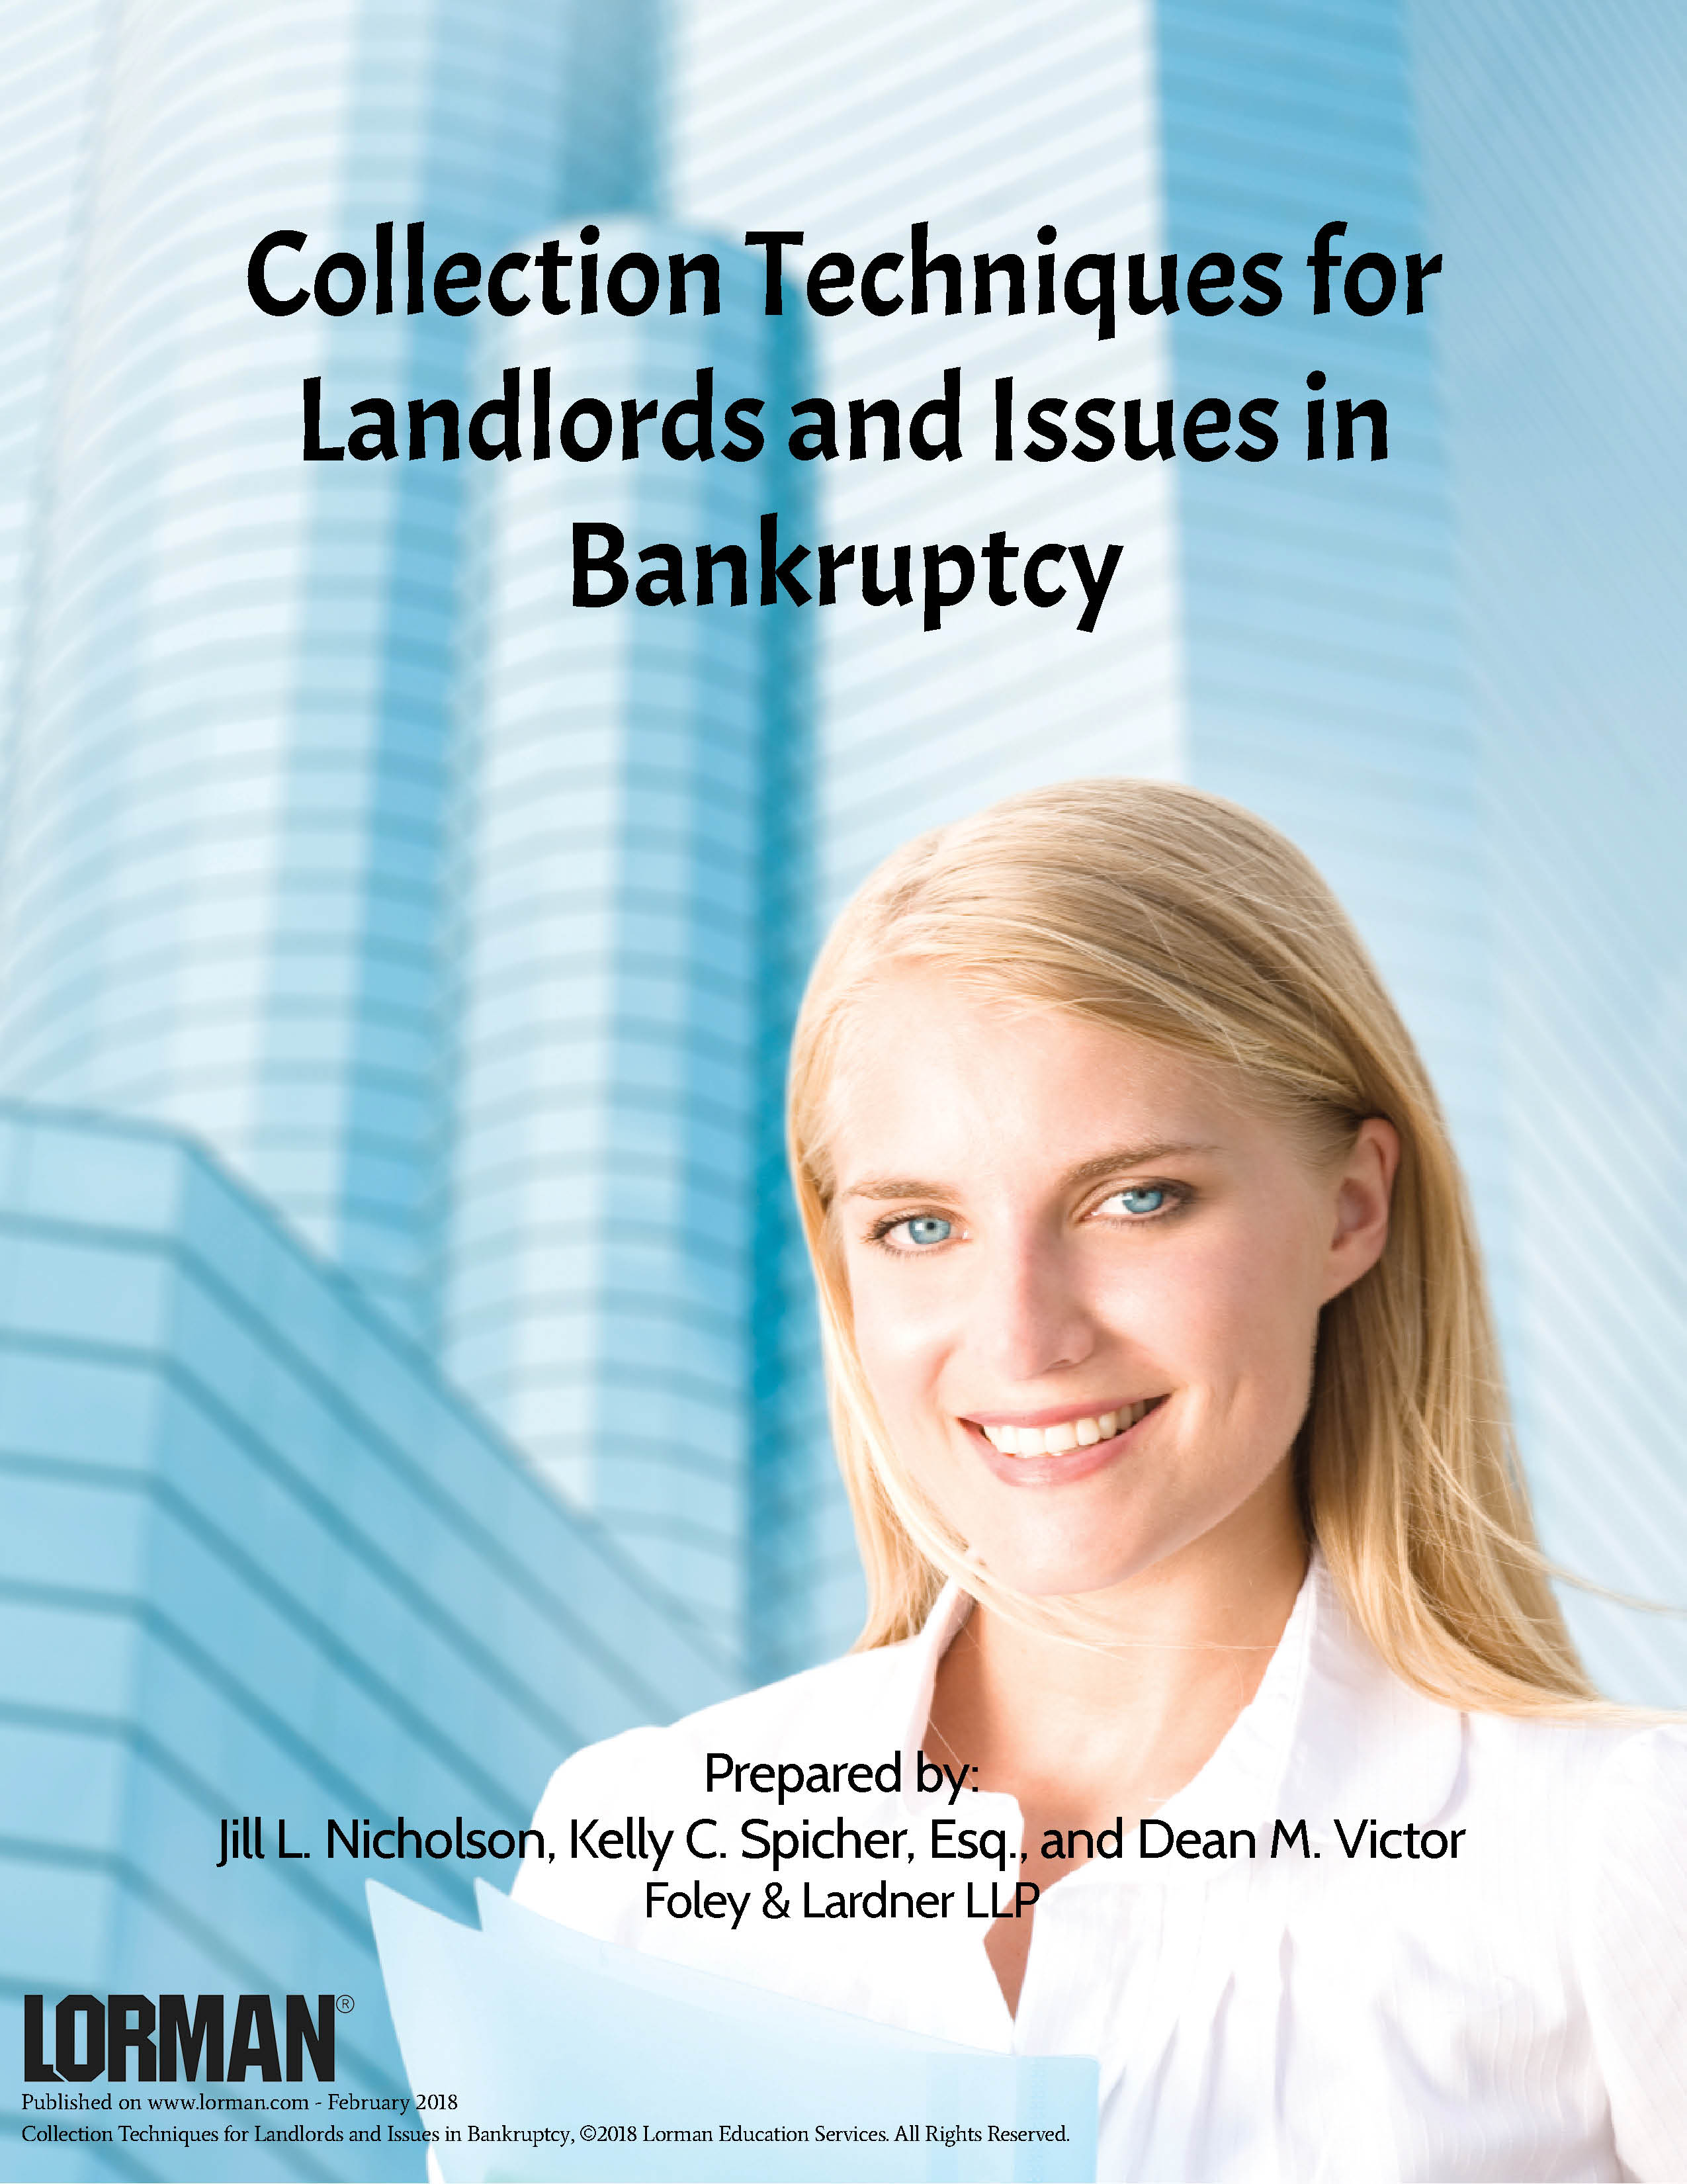 Collection Techniques for Landlords and Issues in Bankruptcy